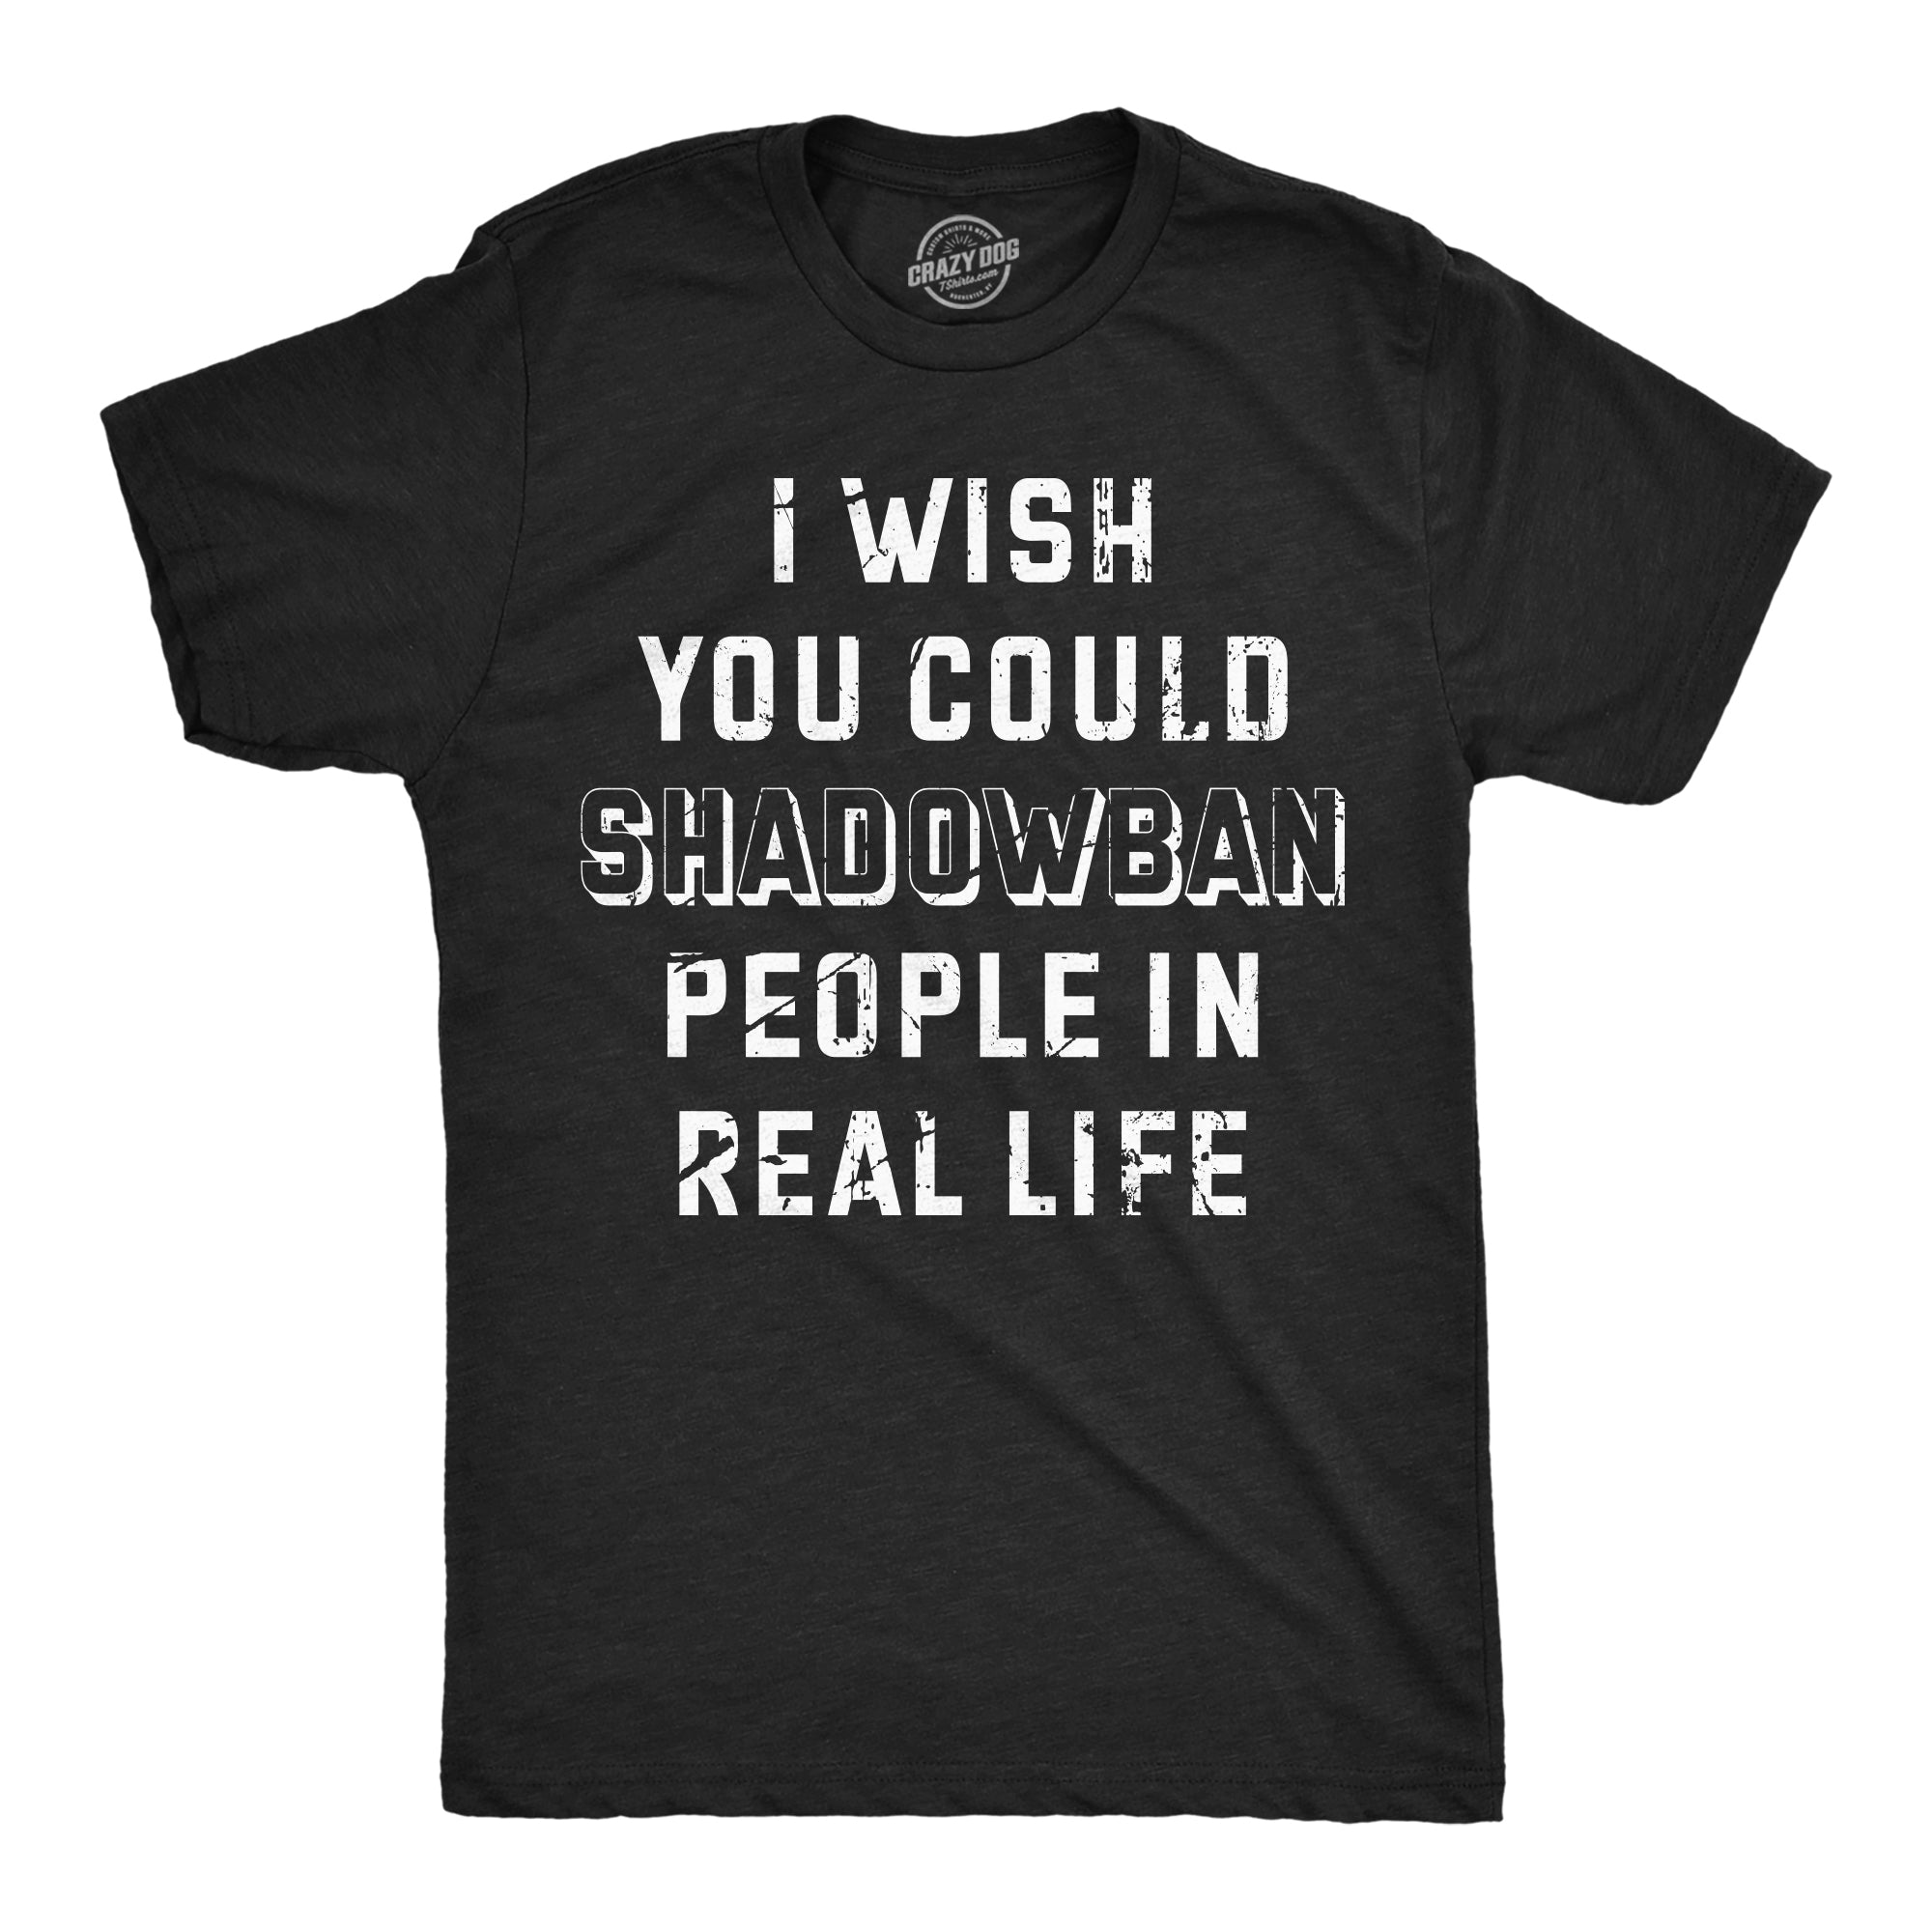 Funny Heather Black - Shadowban People In Real Life I Wish I Could Shadow Ban Peolple In Real Life Mens T Shirt Nerdy Sarcastic Tee